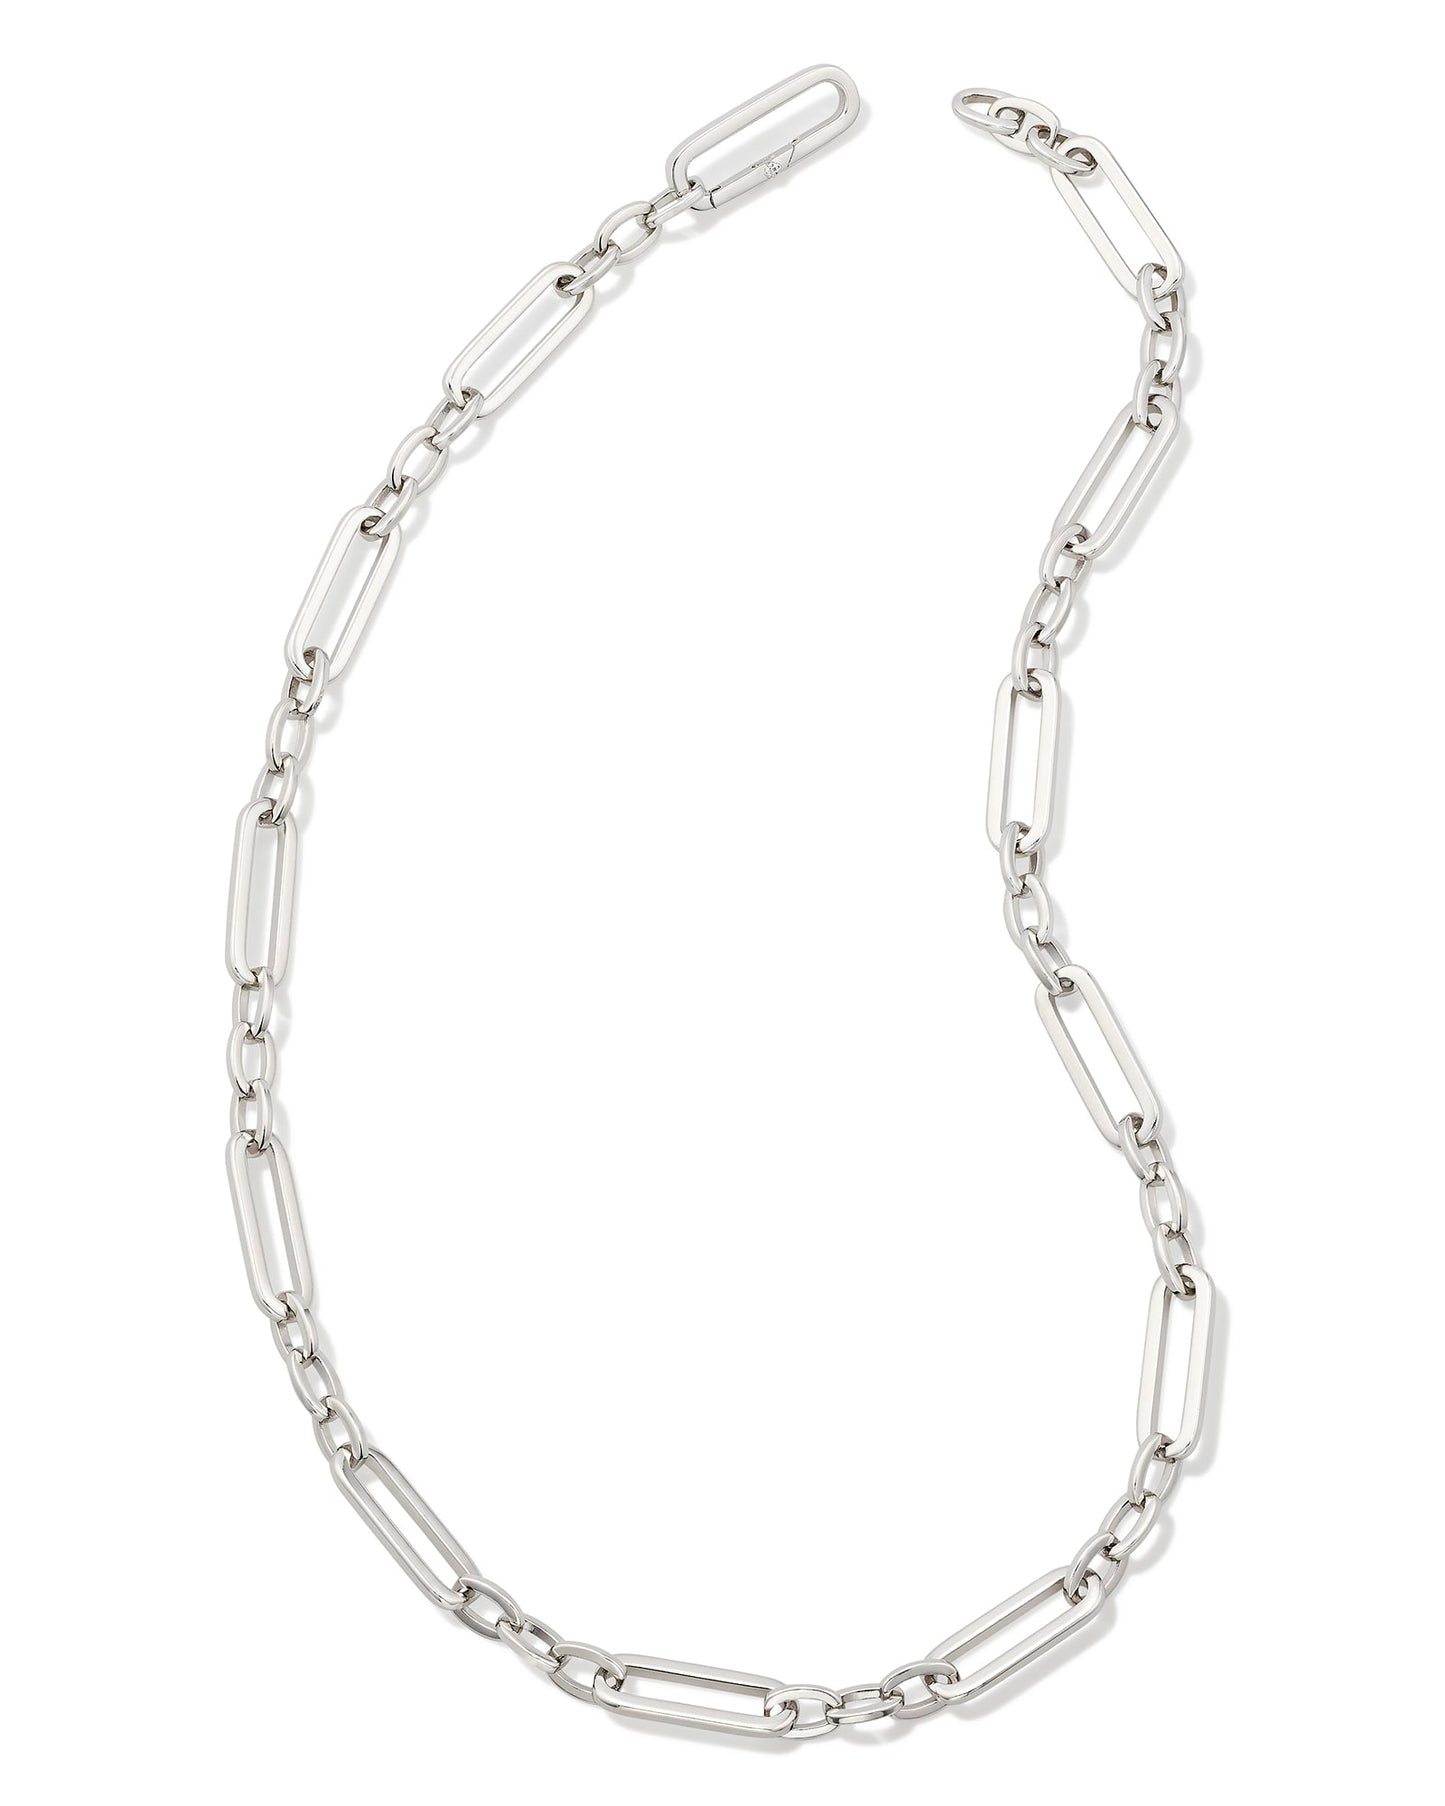 Heather Link and Chain Necklace in Silver